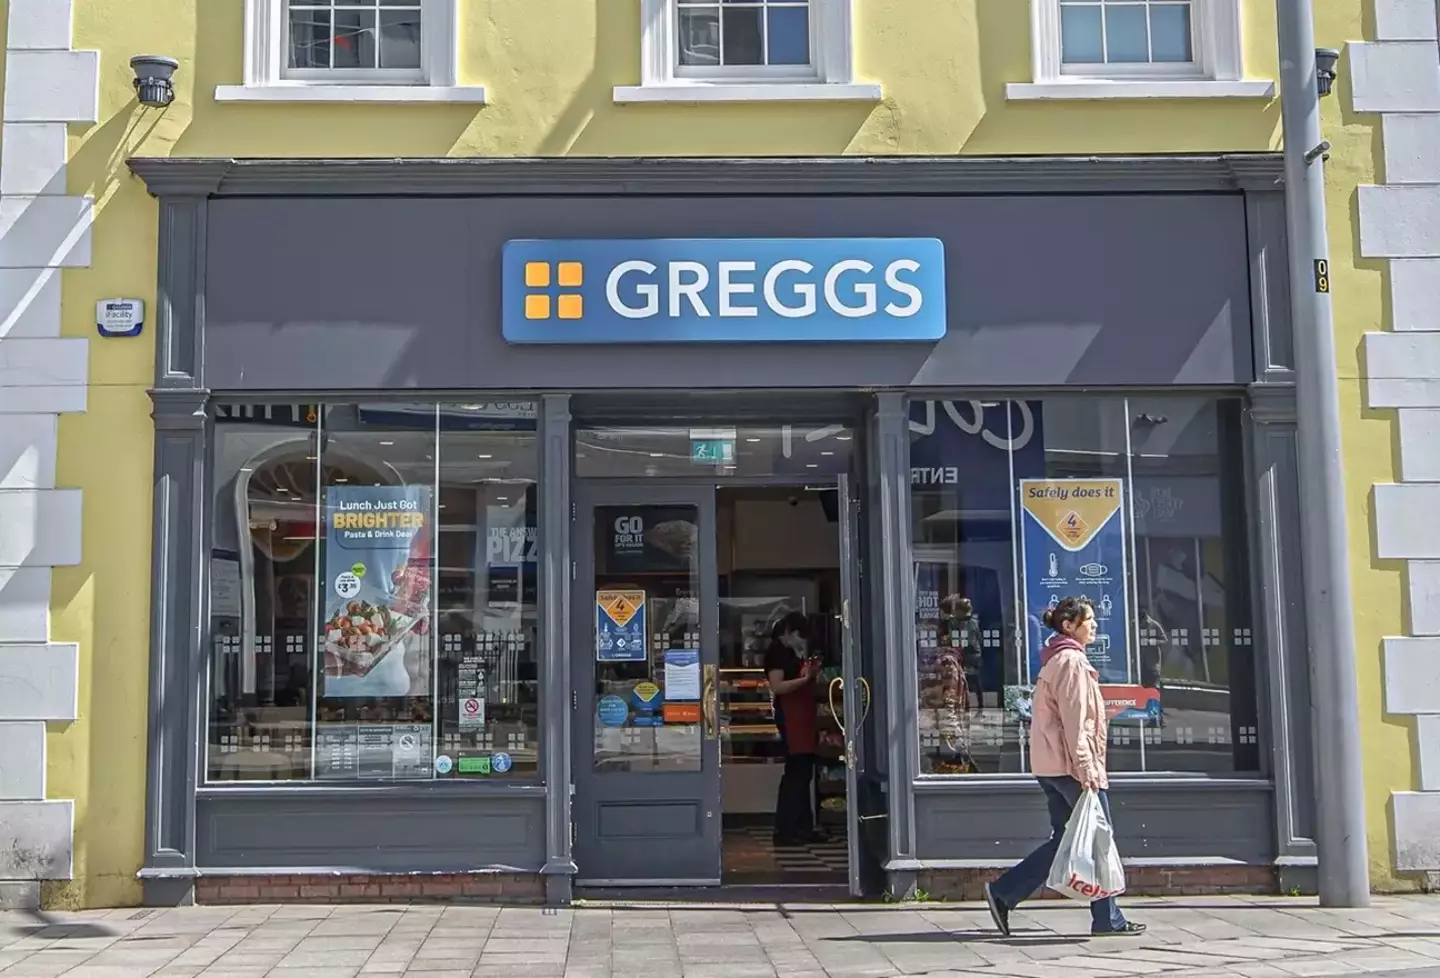 There's a way to nab some of Greggs' most popular items for a fraction of the price.